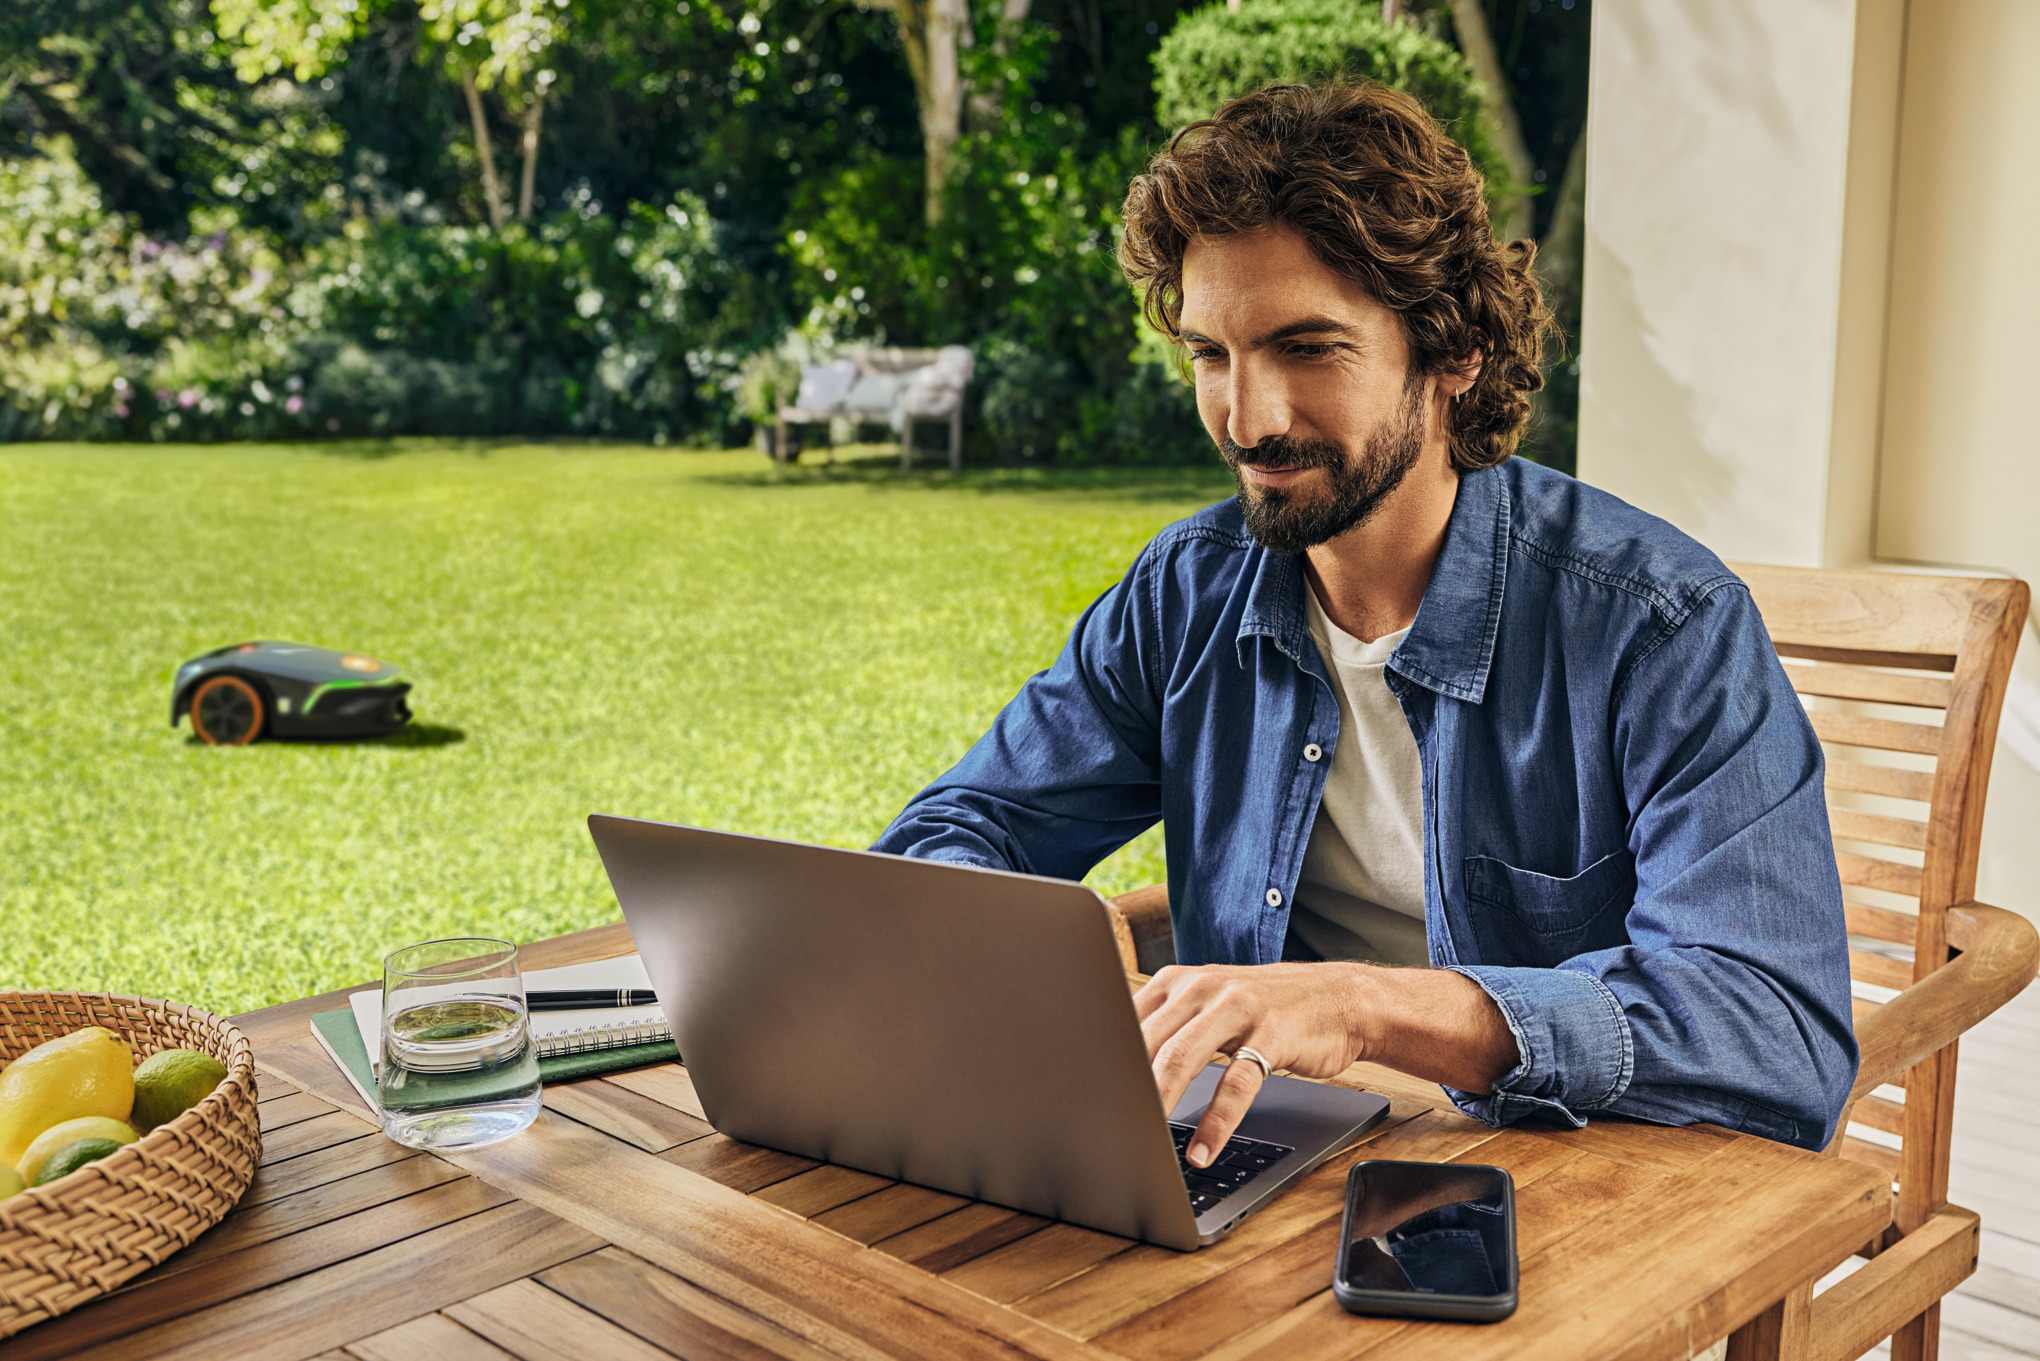 A man works on his laptop in the garden.